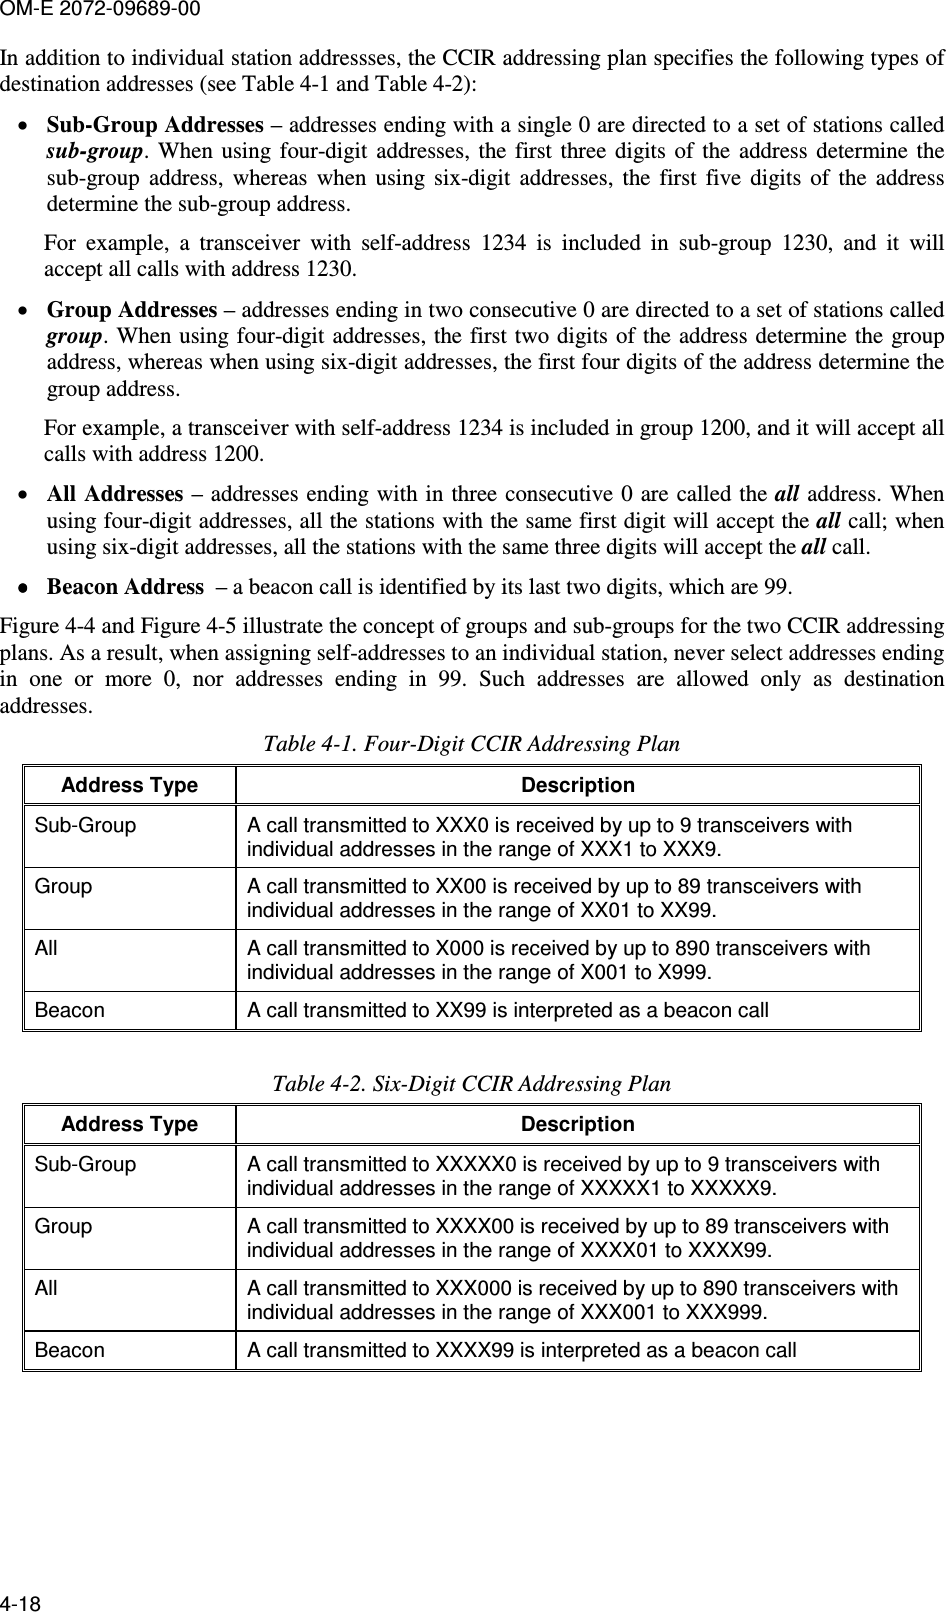 OM-E 2072-09689-00 4-18 In addition to individual station addressses, the CCIR addressing plan specifies the following types of destination addresses (see Table  4-1 and Table  4-2): • Sub-Group Addresses – addresses ending with a single 0 are directed to a set of stations called sub-group.  When  using four-digit  addresses,  the  first  three  digits of  the  address determine  the sub-group  address,  whereas  when  using  six-digit  addresses,  the  first  five  digits  of  the  address determine the sub-group address.  For  example,  a  transceiver  with  self-address  1234  is  included  in  sub-group  1230,  and  it  will accept all calls with address 1230.  • Group Addresses – addresses ending in two consecutive 0 are directed to a set of stations called group. When using four-digit addresses, the first two digits of the address determine the group address, whereas when using six-digit addresses, the first four digits of the address determine the group address.  For example, a transceiver with self-address 1234 is included in group 1200, and it will accept all calls with address 1200.  • All Addresses – addresses ending with in three consecutive 0 are called the all address. When using four-digit addresses, all the stations with the same first digit will accept the all call; when using six-digit addresses, all the stations with the same three digits will accept the all call. •••• Beacon Address  – a beacon call is identified by its last two digits, which are 99. Figure  4-4 and Figure  4-5 illustrate the concept of groups and sub-groups for the two CCIR addressing plans. As a result, when assigning self-addresses to an individual station, never select addresses ending in  one  or  more  0,  nor  addresses  ending  in  99.  Such  addresses  are  allowed  only  as  destination addresses. Table  4-1. Four-Digit CCIR Addressing Plan Address Type  Description Sub-Group  A call transmitted to XXX0 is received by up to 9 transceivers with individual addresses in the range of XXX1 to XXX9. Group  A call transmitted to XX00 is received by up to 89 transceivers with individual addresses in the range of XX01 to XX99. All  A call transmitted to X000 is received by up to 890 transceivers with individual addresses in the range of X001 to X999. Beacon   A call transmitted to XX99 is interpreted as a beacon call  Table  4-2. Six-Digit CCIR Addressing Plan Address Type  Description Sub-Group  A call transmitted to XXXXX0 is received by up to 9 transceivers with individual addresses in the range of XXXXX1 to XXXXX9. Group  A call transmitted to XXXX00 is received by up to 89 transceivers with individual addresses in the range of XXXX01 to XXXX99. All  A call transmitted to XXX000 is received by up to 890 transceivers with individual addresses in the range of XXX001 to XXX999. Beacon  A call transmitted to XXXX99 is interpreted as a beacon call  